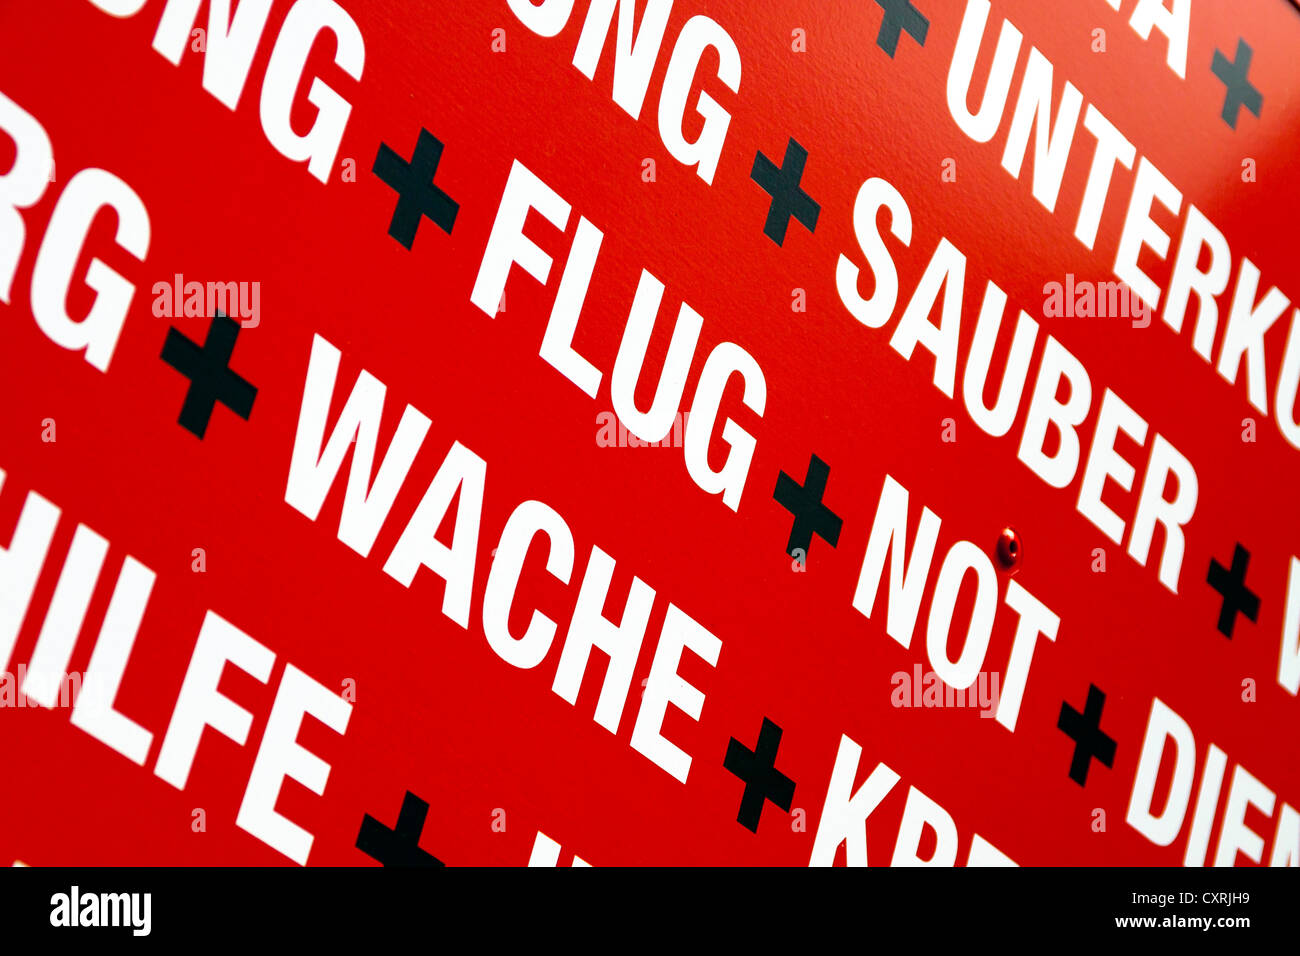 Keywords, white lettering on red, on an used clothes container, Berlin, Germany, Europe Stock Photo